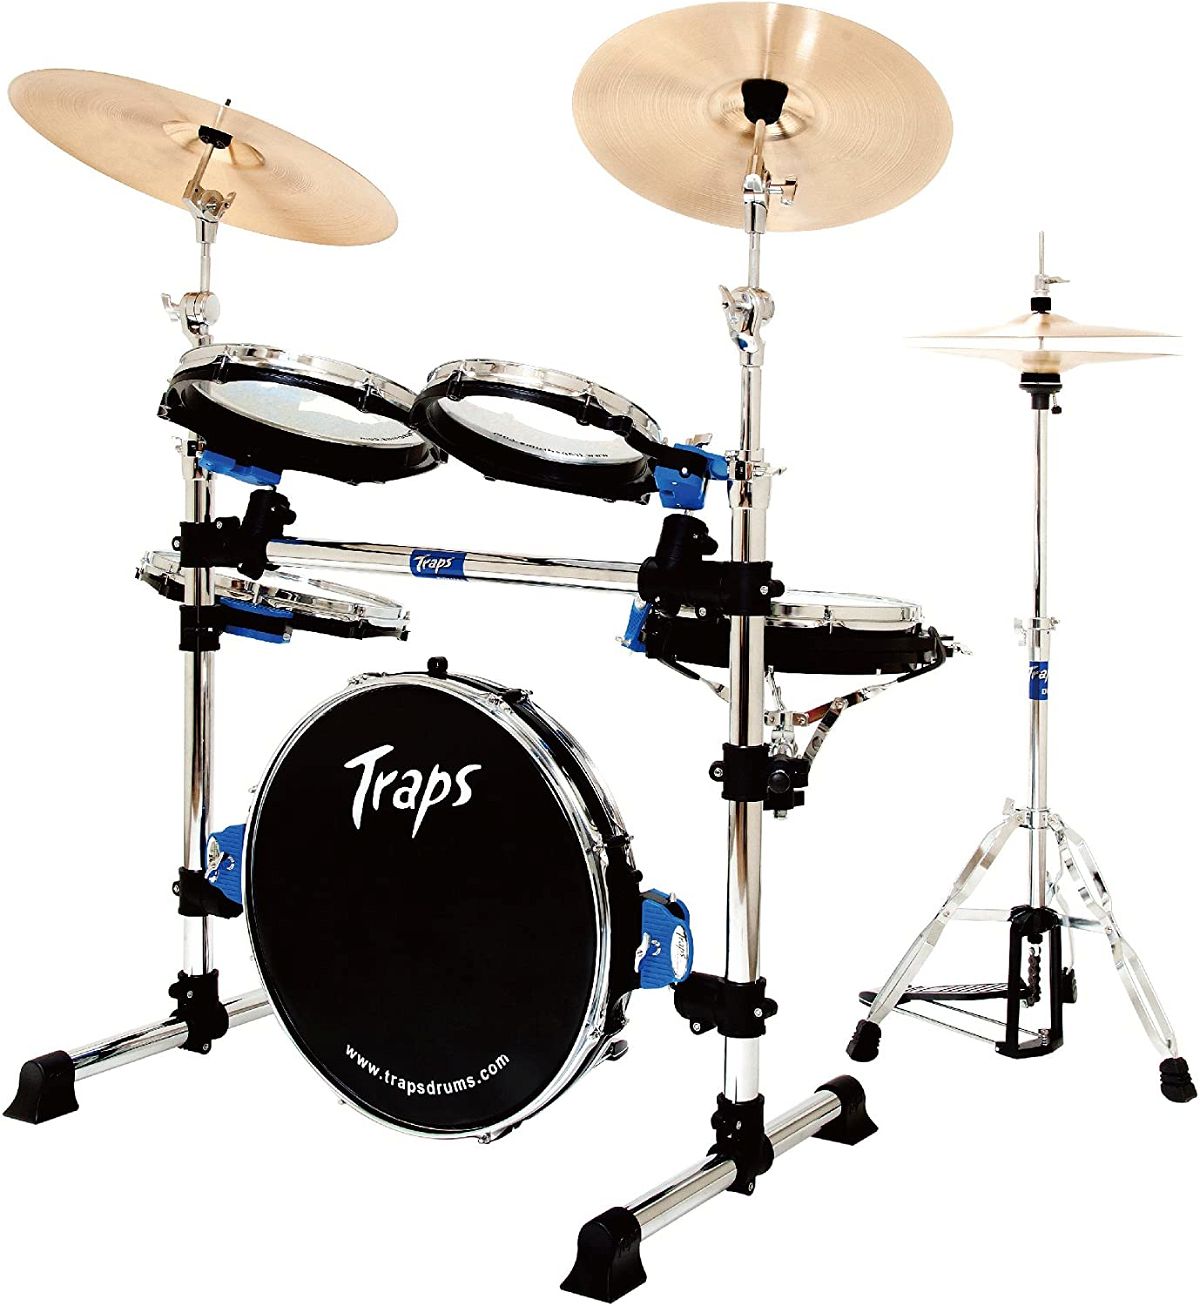 Traps Drums A400 Portable Drum Kit With Hardware